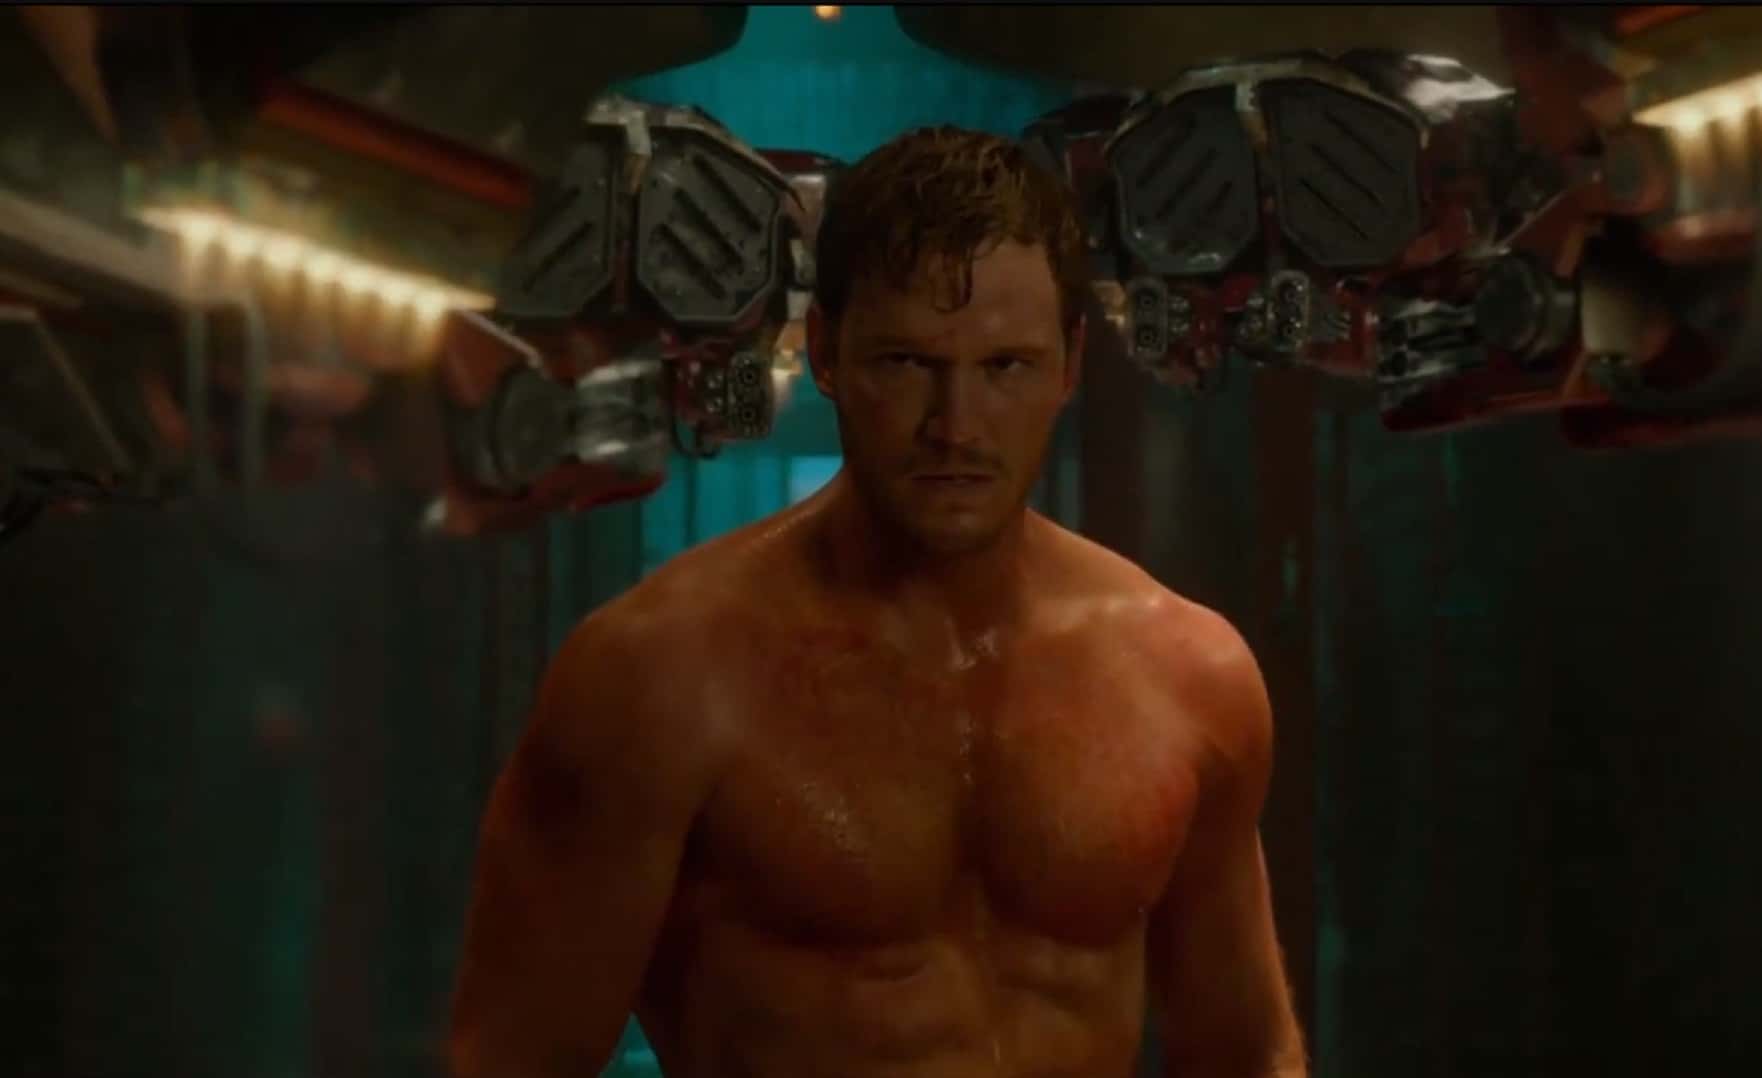 Guardians Of The Galaxy's Chris Pratt used to be a stripper